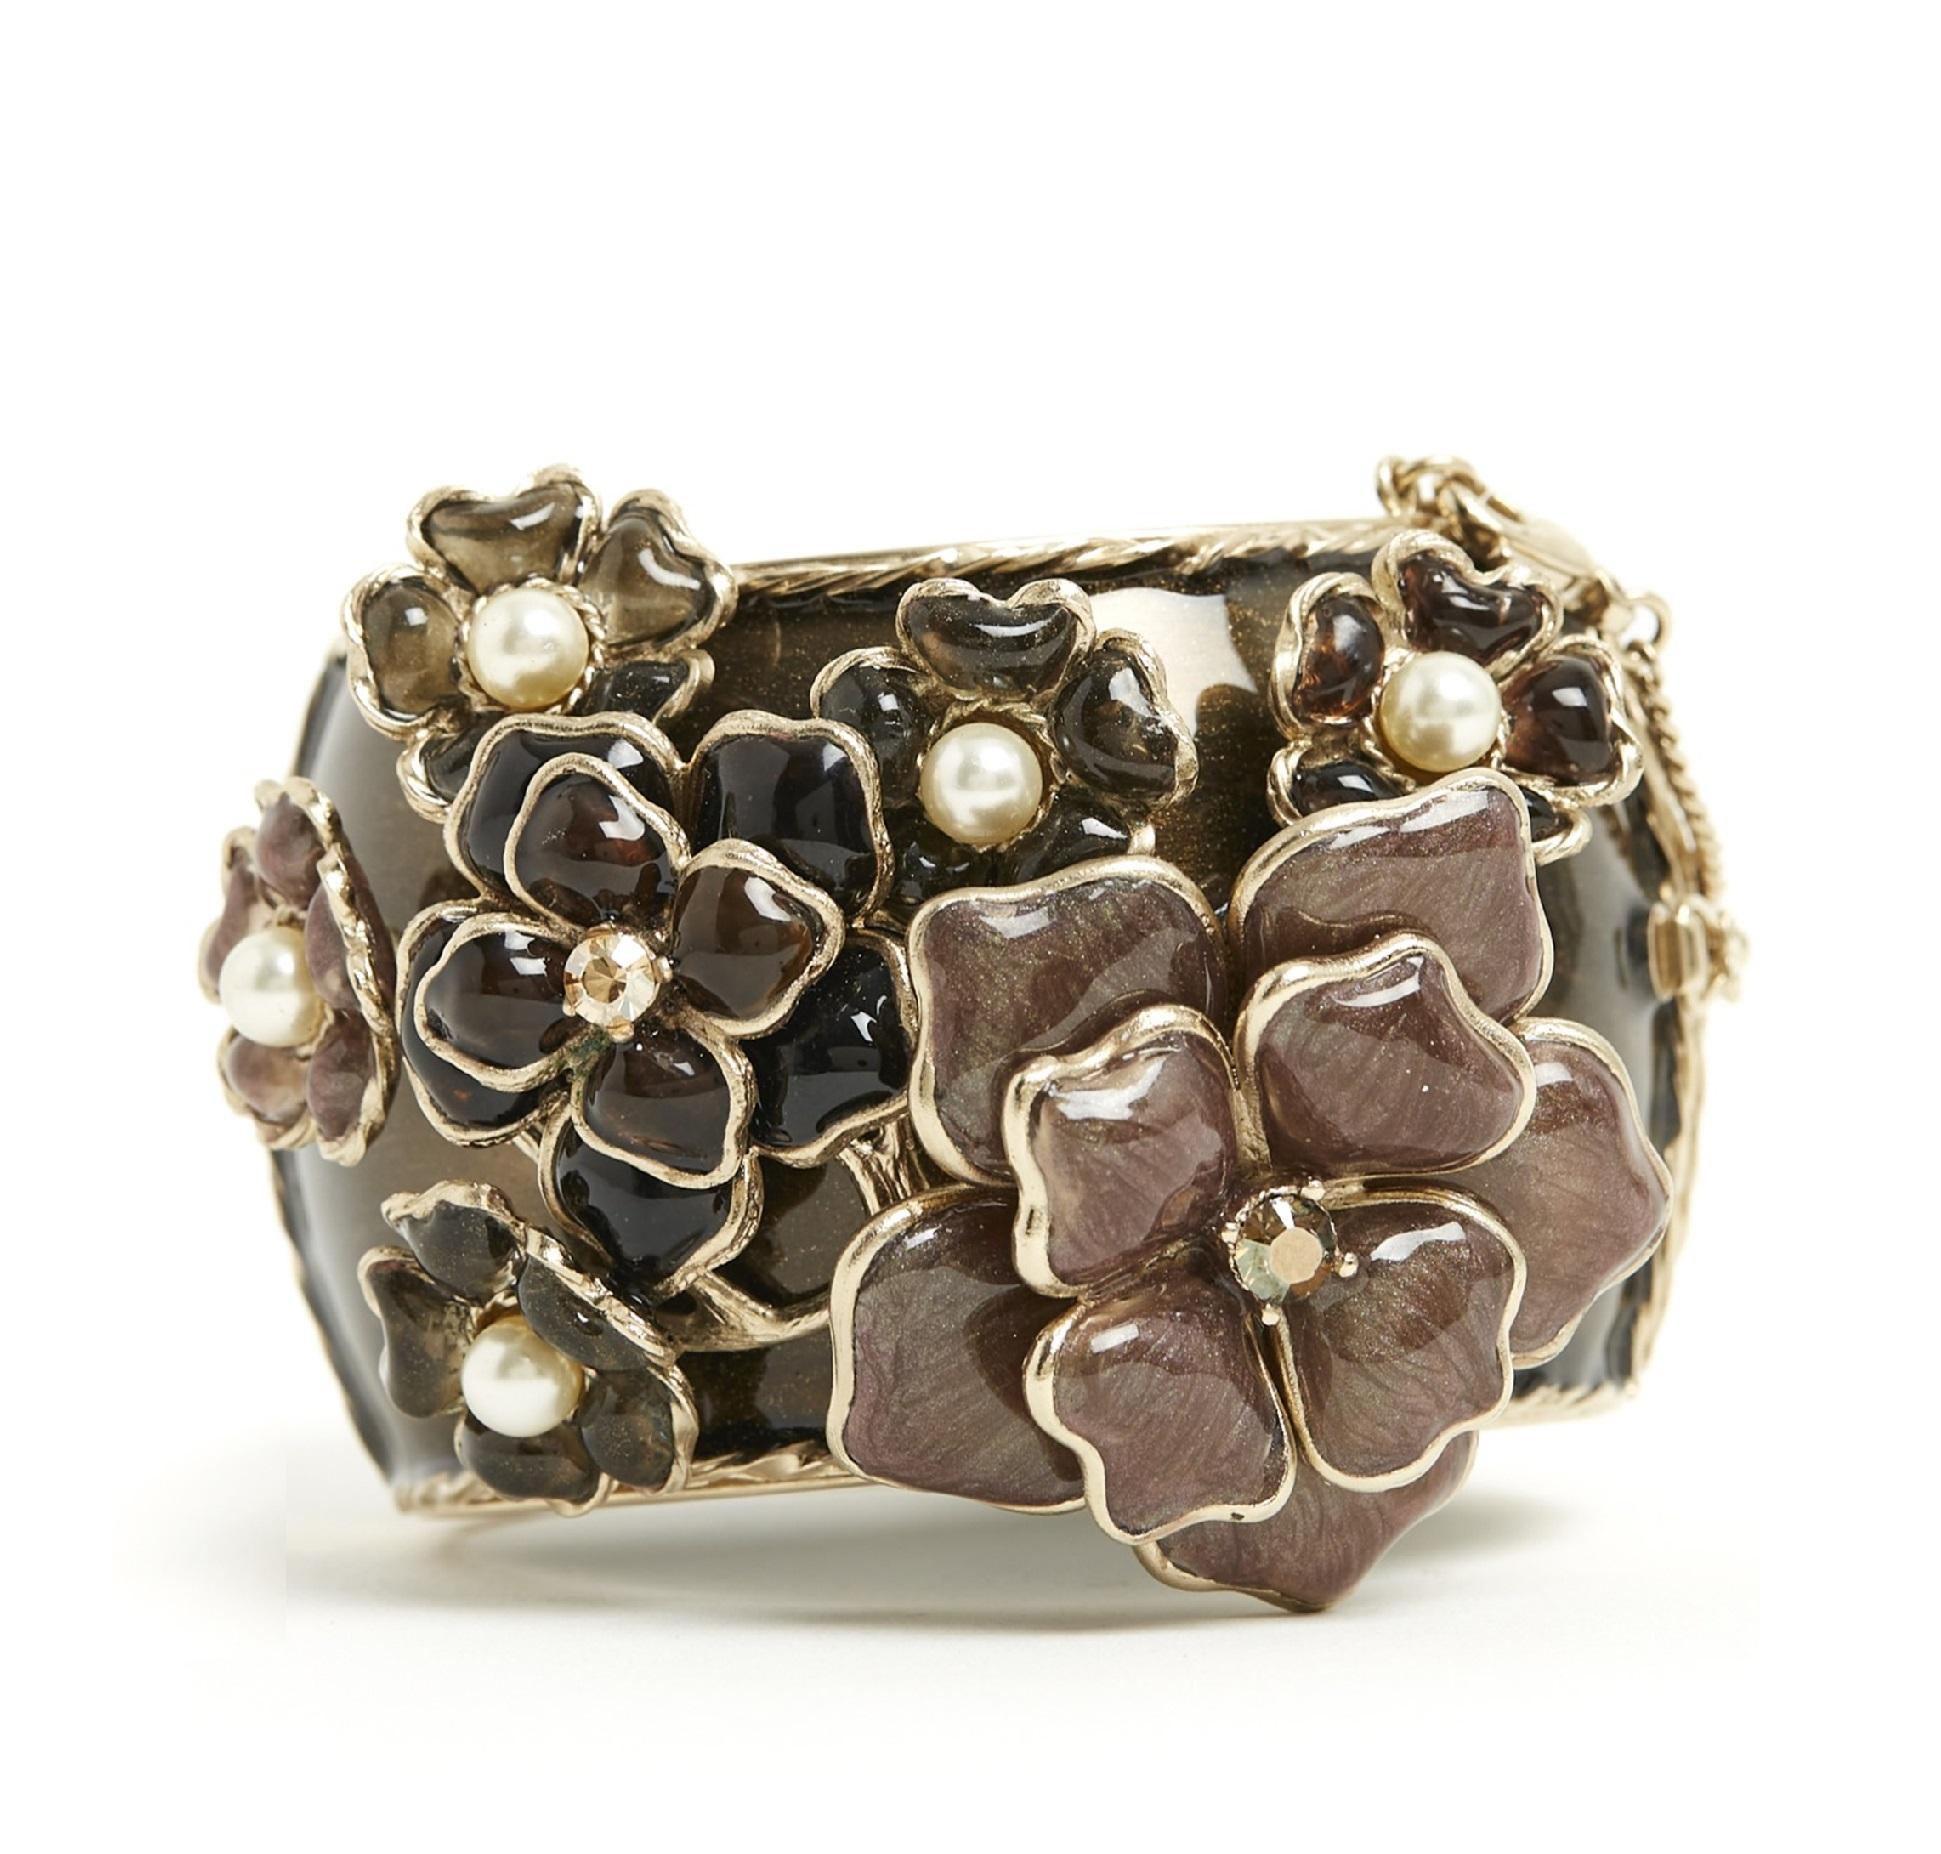 Chanel cuff bracelet in gold metal covered with brown enamel decorated with a large CC in enameled metal on one side and a large floral pattern in glass paste decorated with white rhinestones and fancy pearls, magnetic closure lined with a hook and